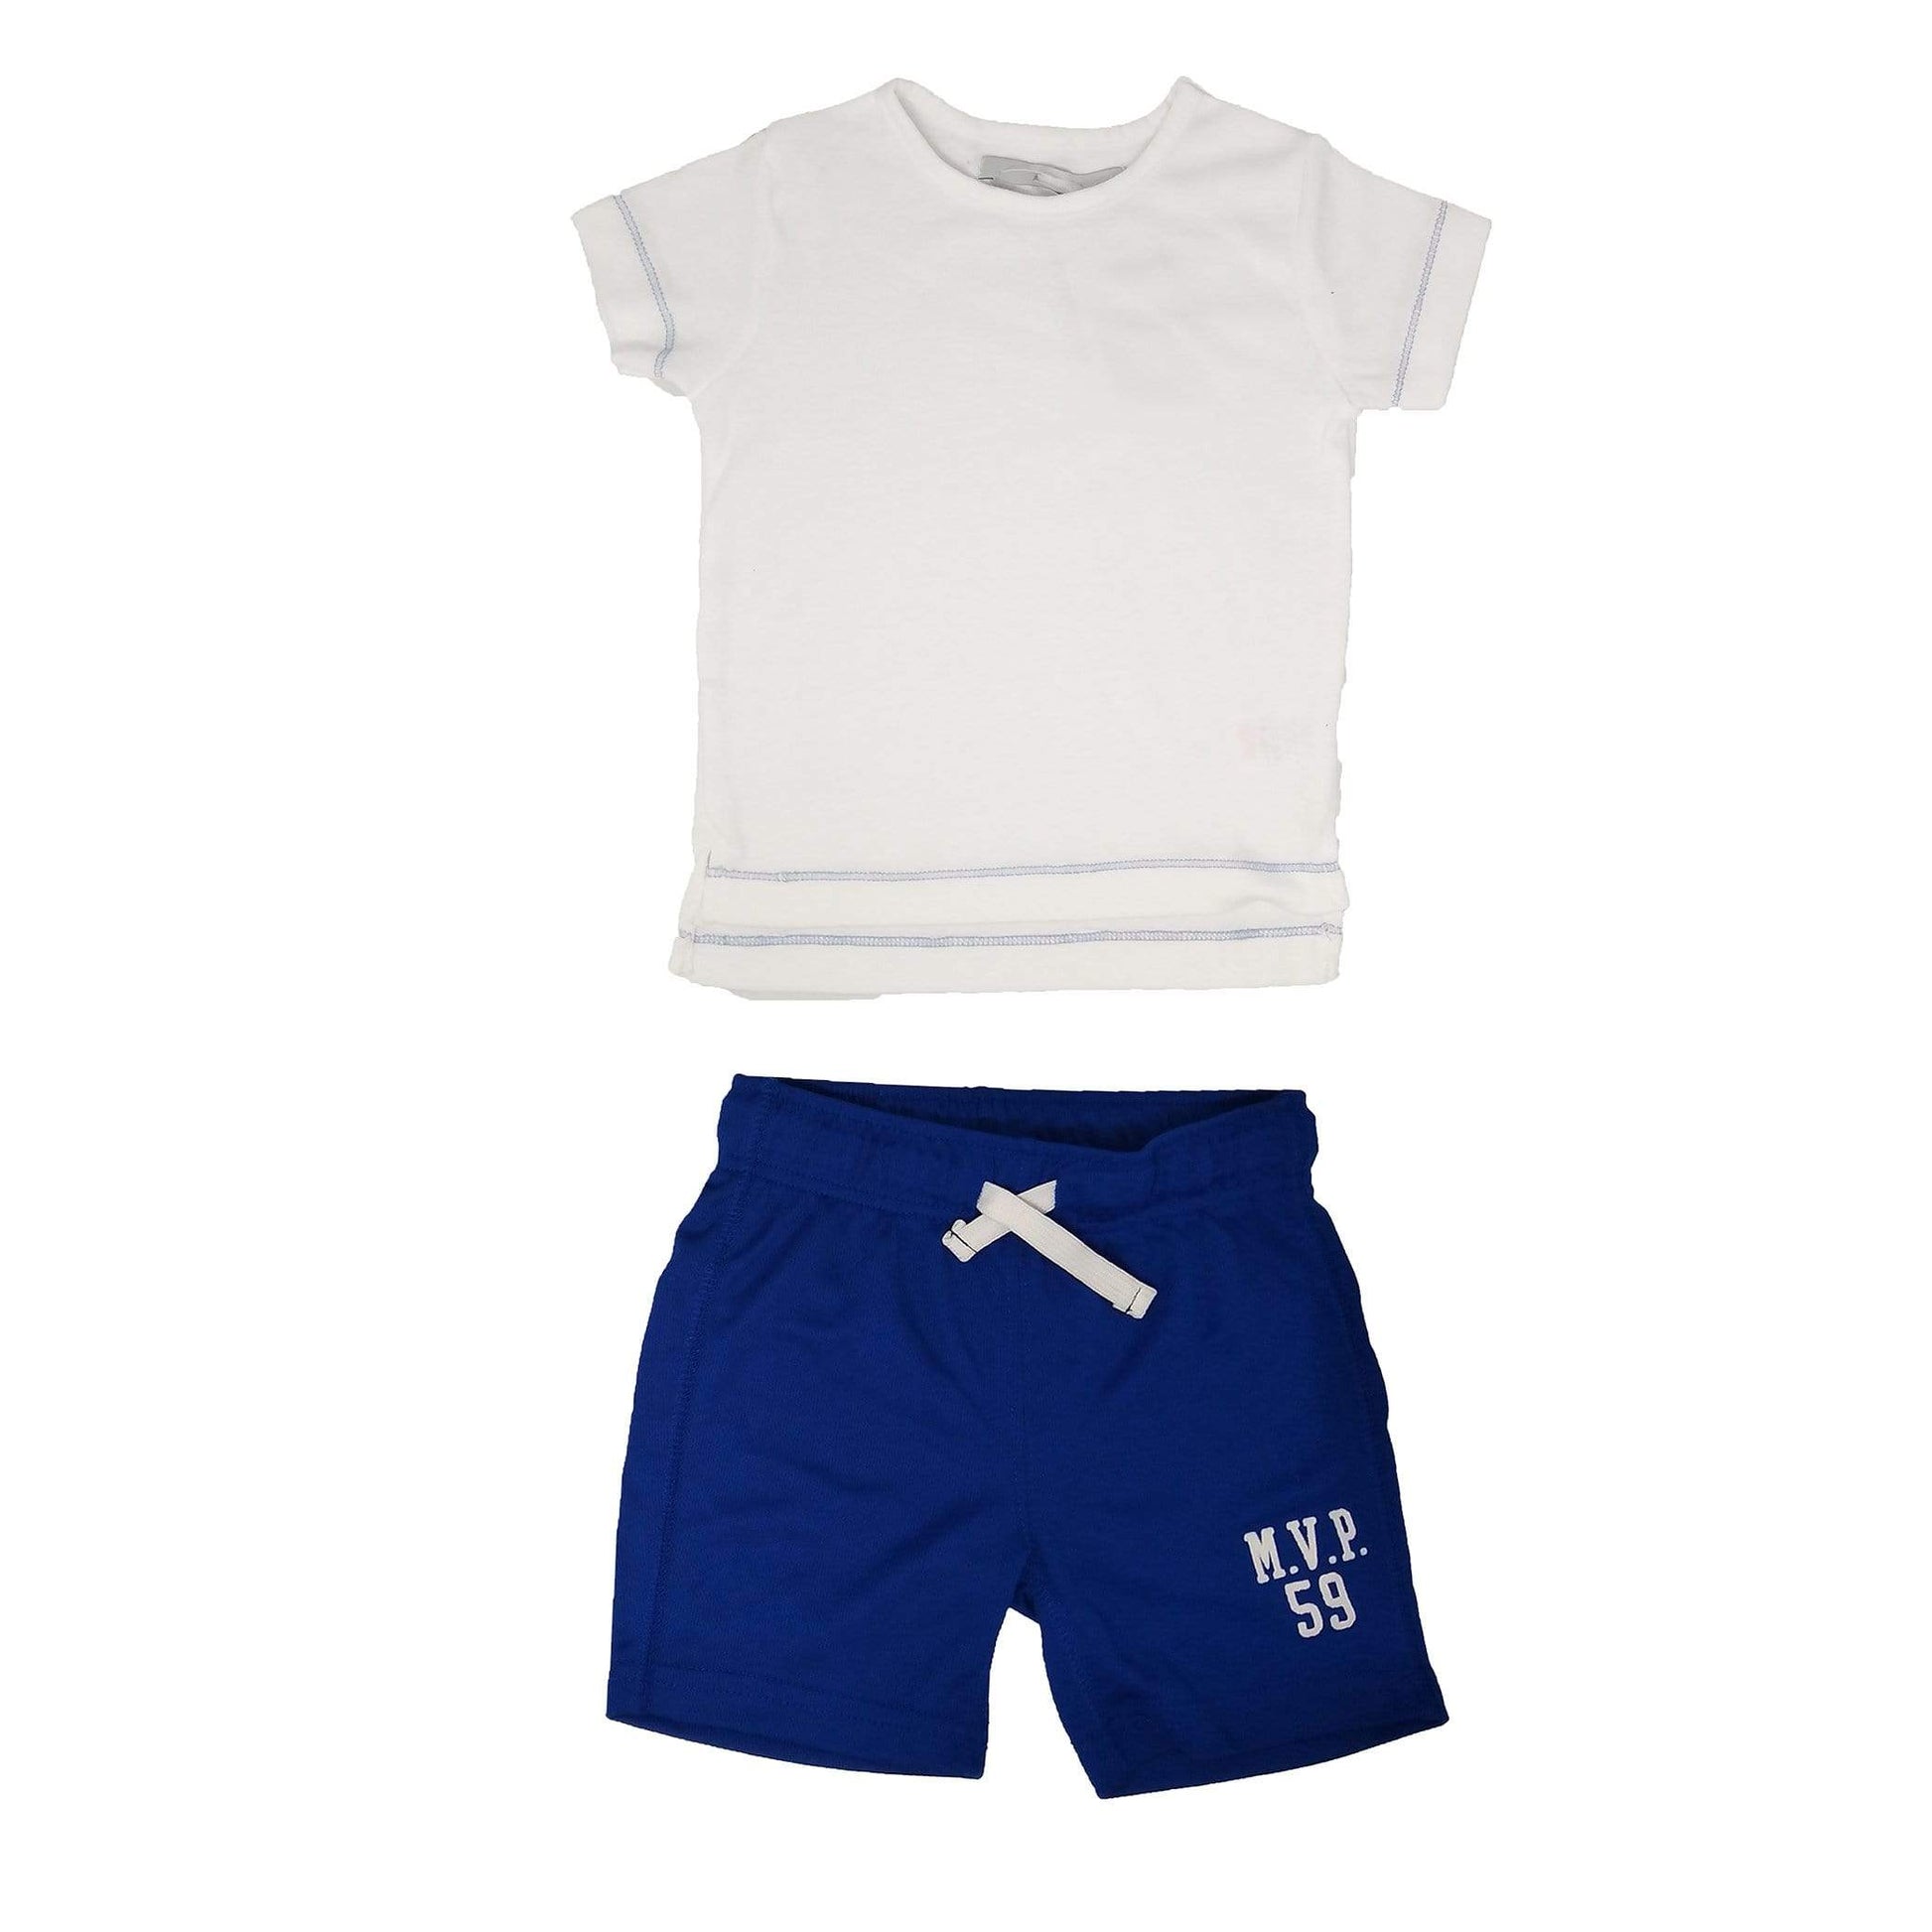 CARTER'S Baby Boy CARTER'S - Baby Casual Sportrs Set